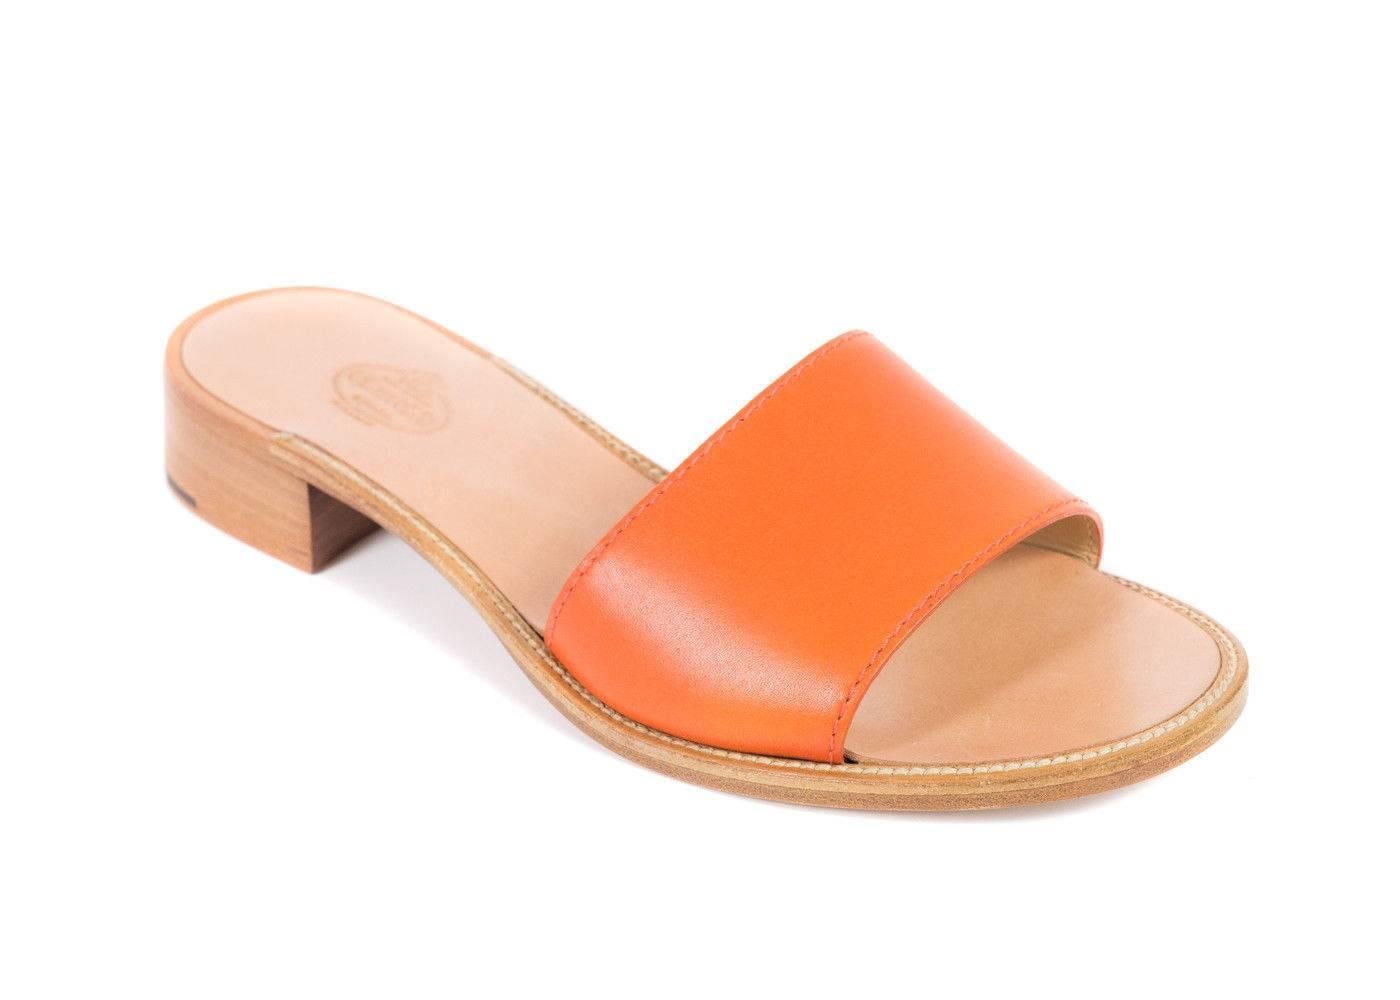 Church's Laura Tangerine Leather Mules Sandals In New Condition For Sale In Brooklyn, NY